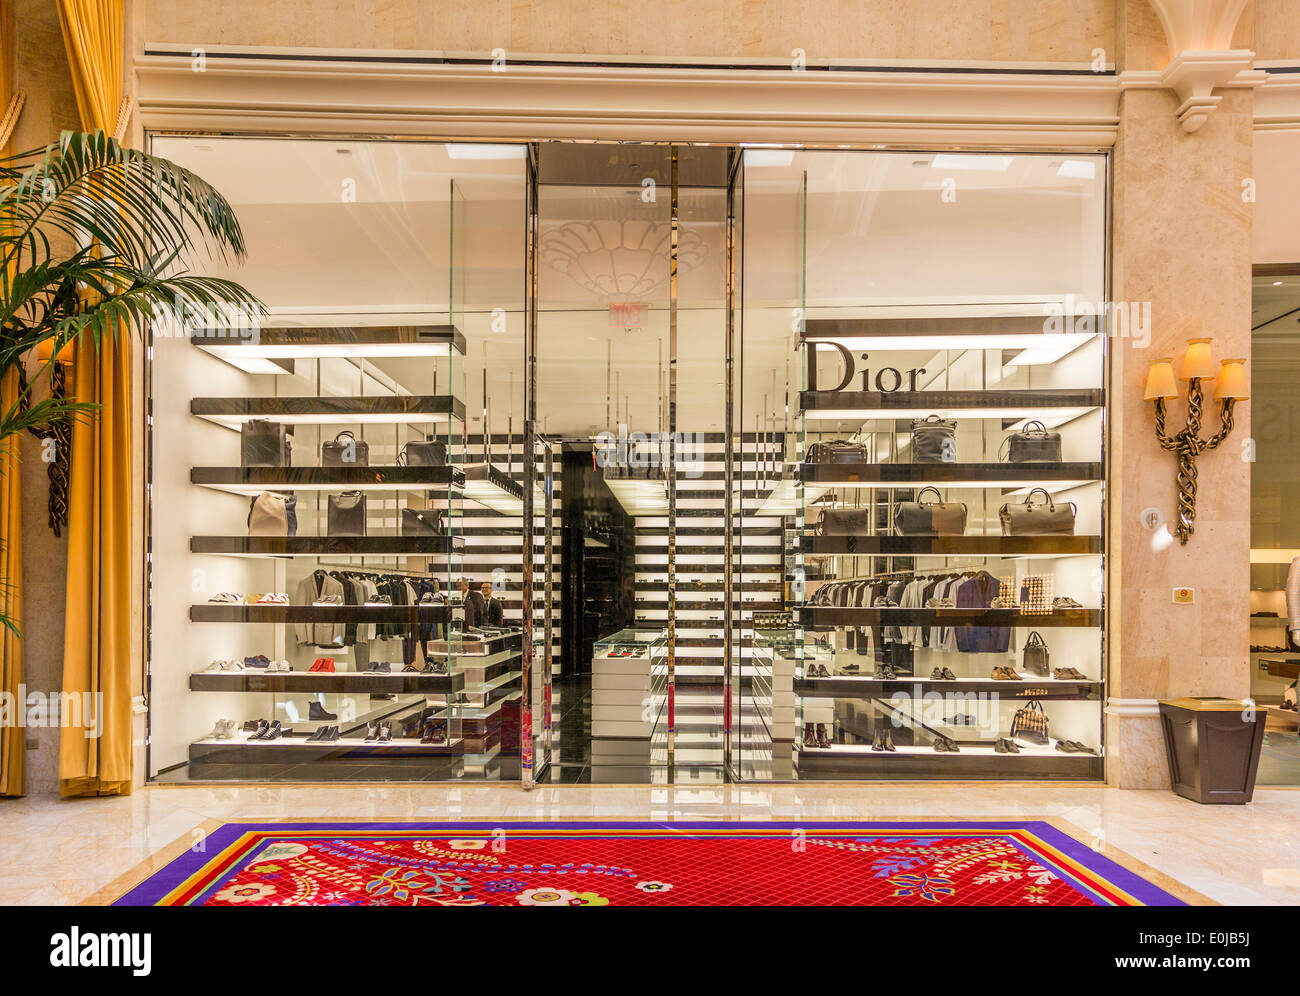 The Dior Homme shop in the Esplanade of  the Wynn Hotel Las Vegas Nevada Stock Photo